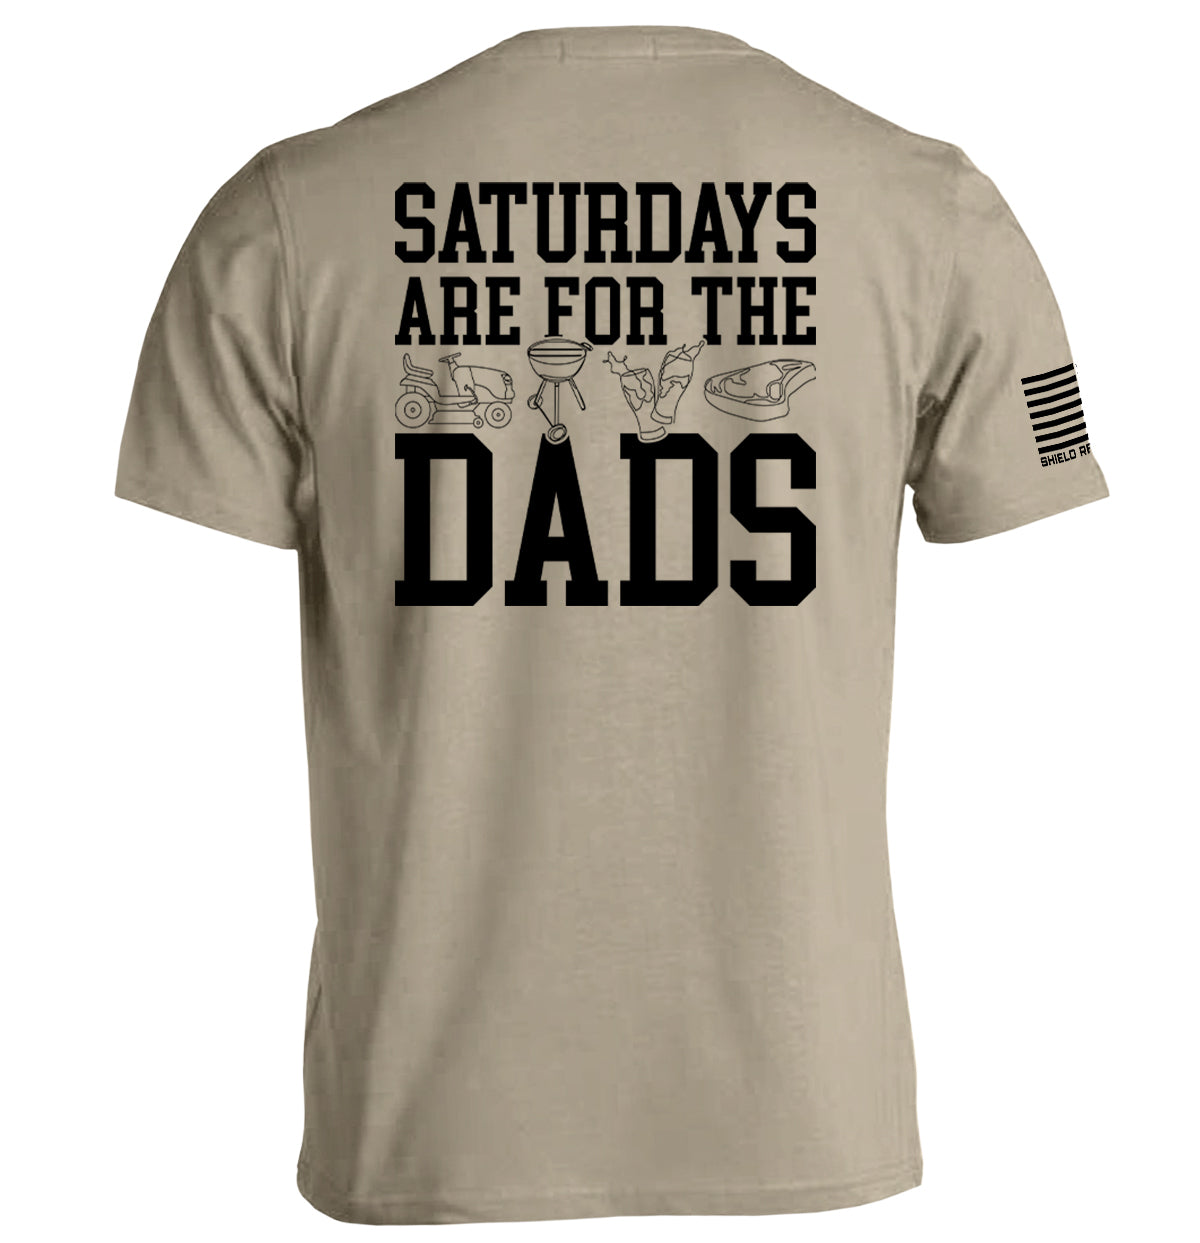 Saturdays Are For The Dads